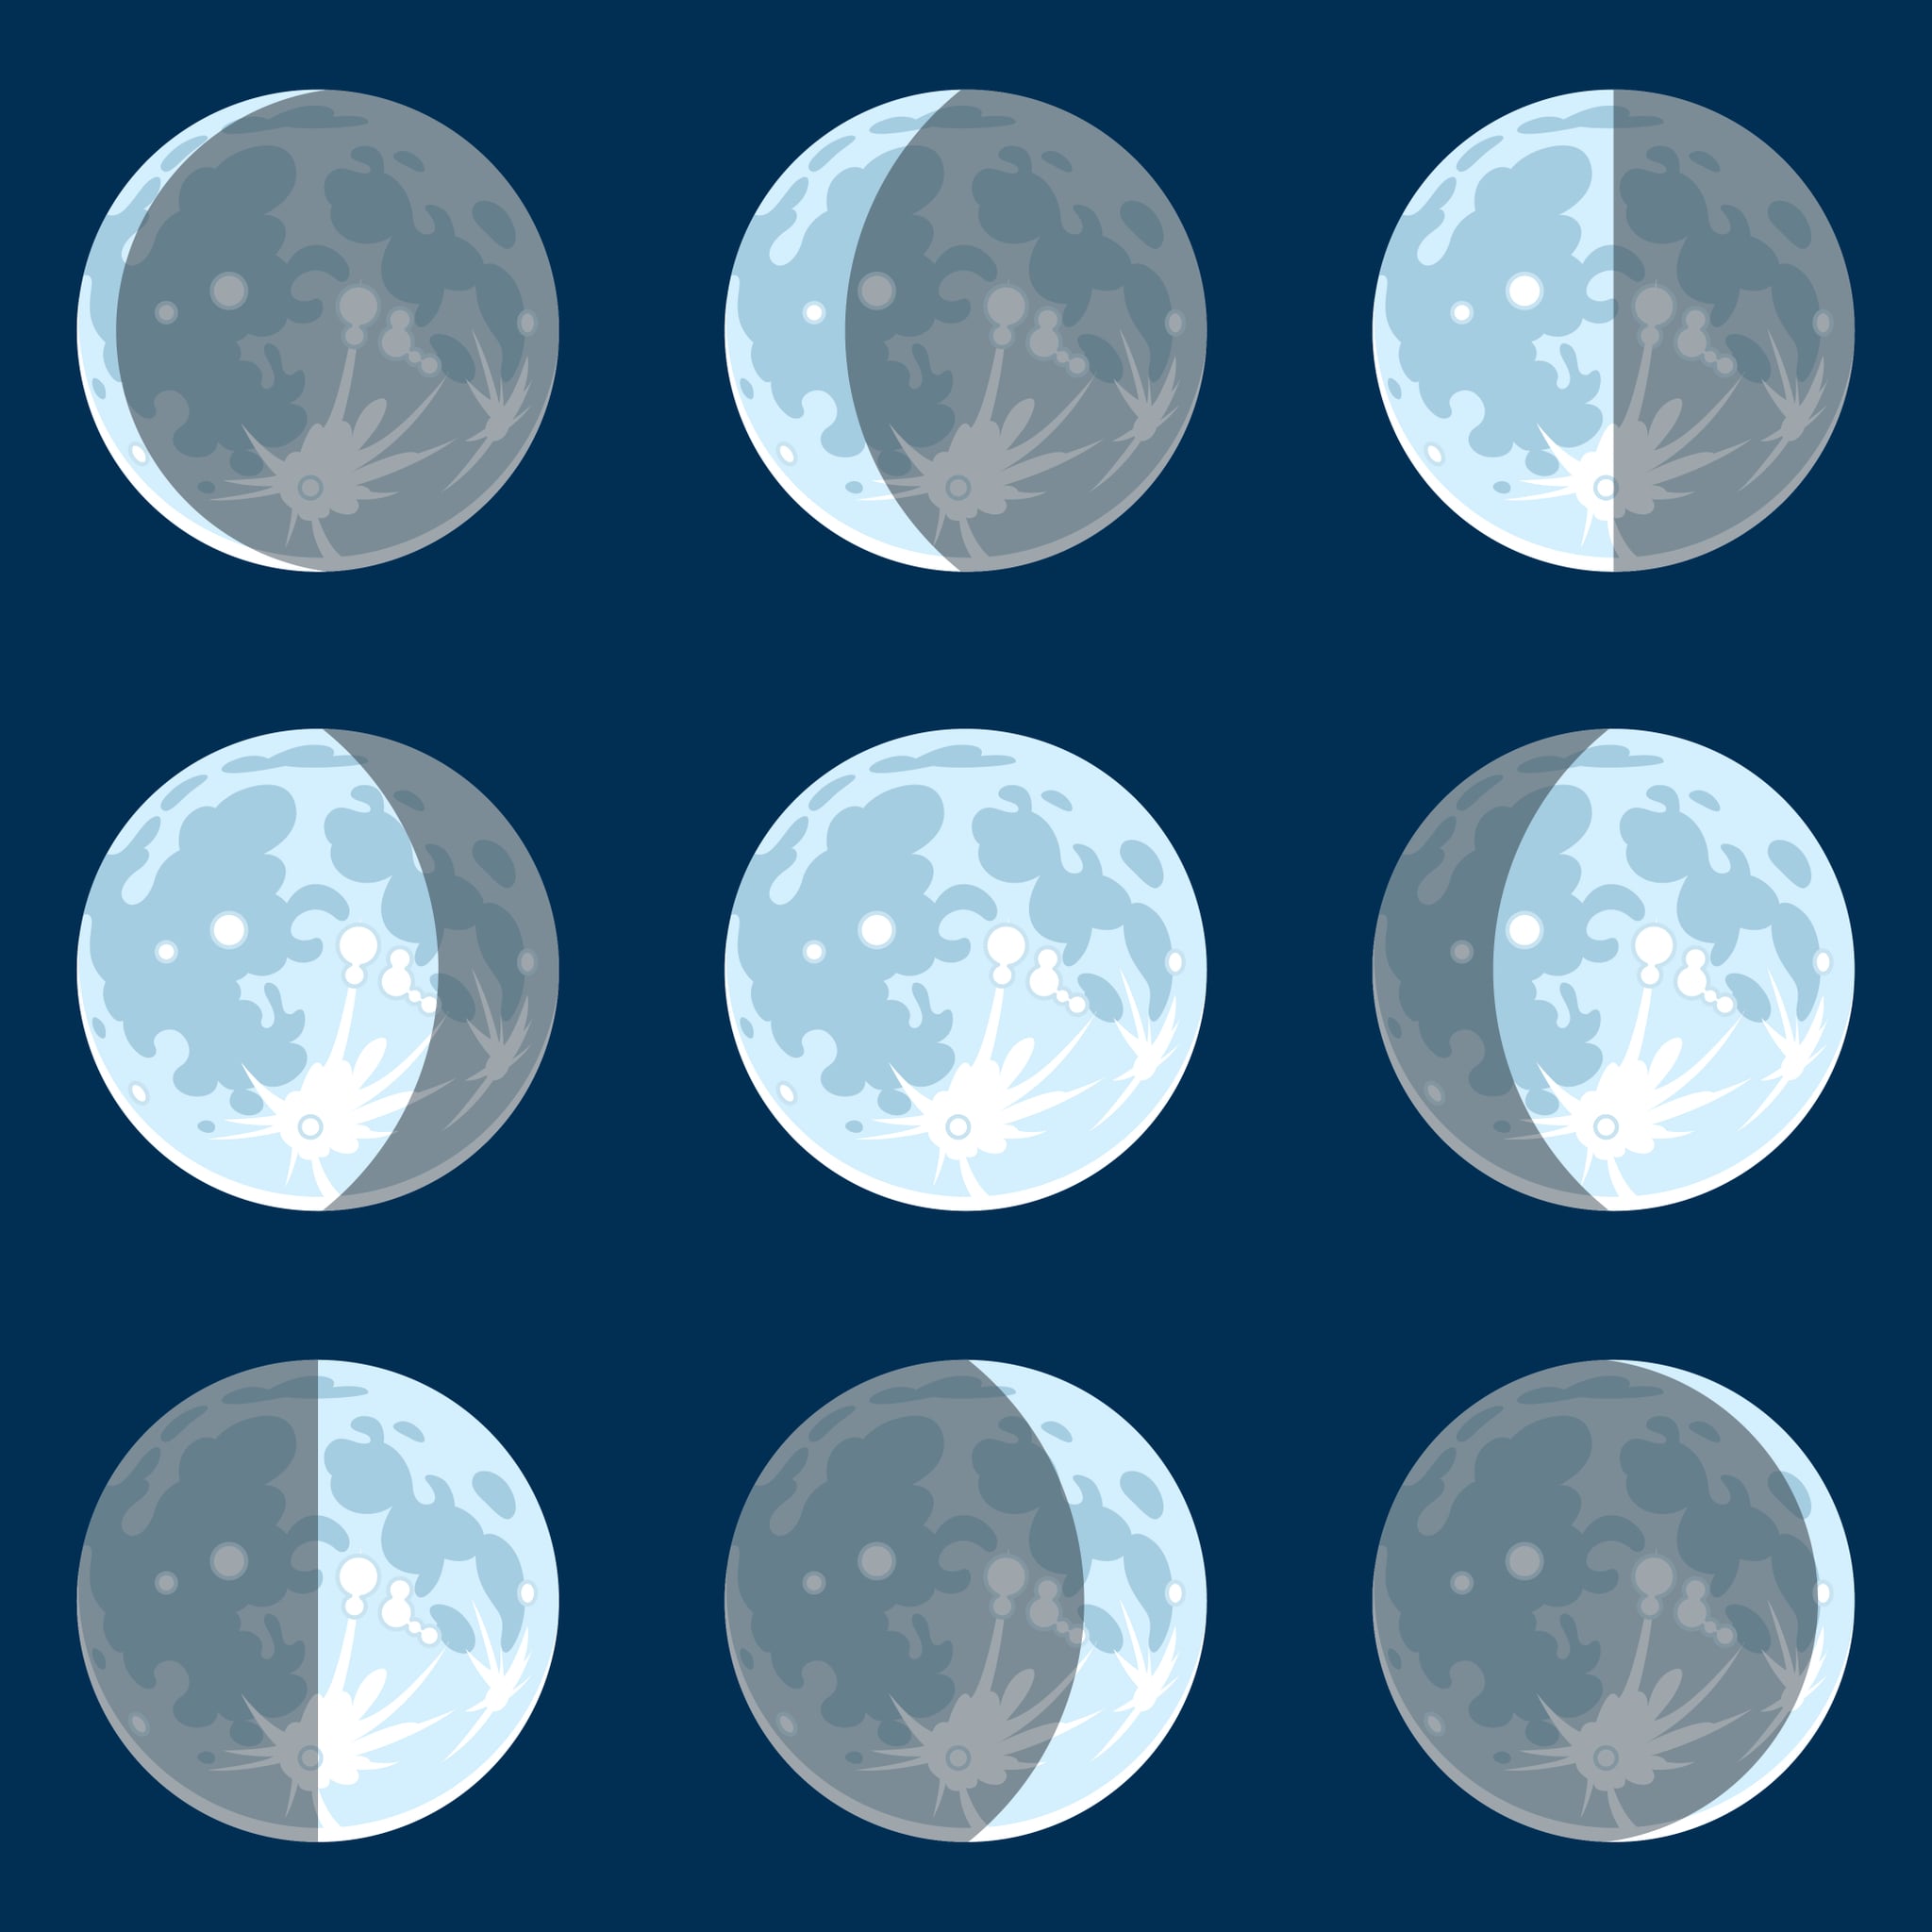 Vecter illustration of moon phases